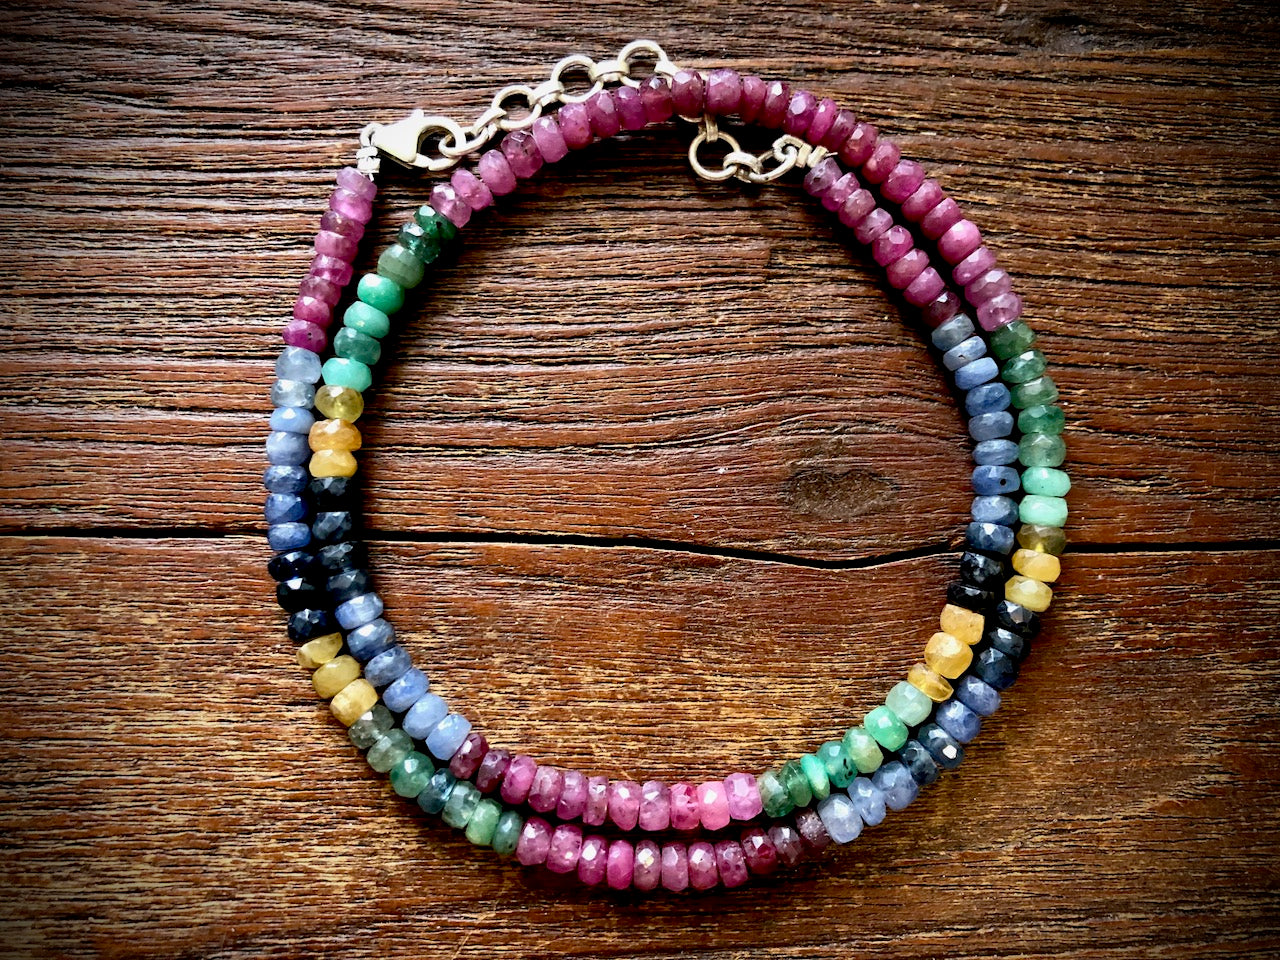 Mixed Gemstones (Sapphires & More) Strand/Necklace